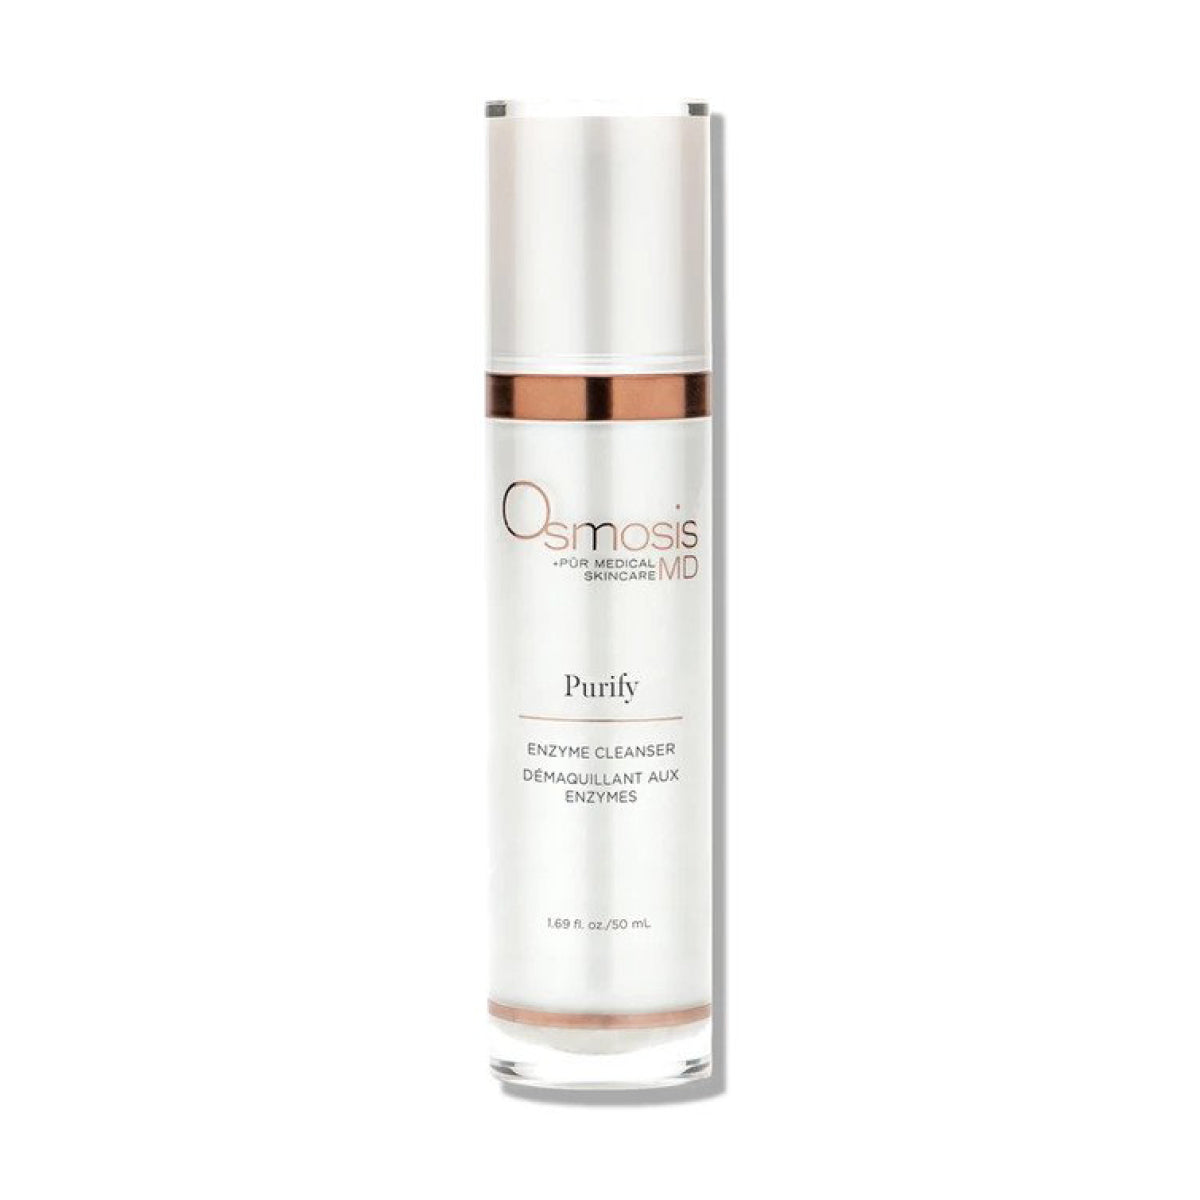 Purify - Enzyme Cleanser